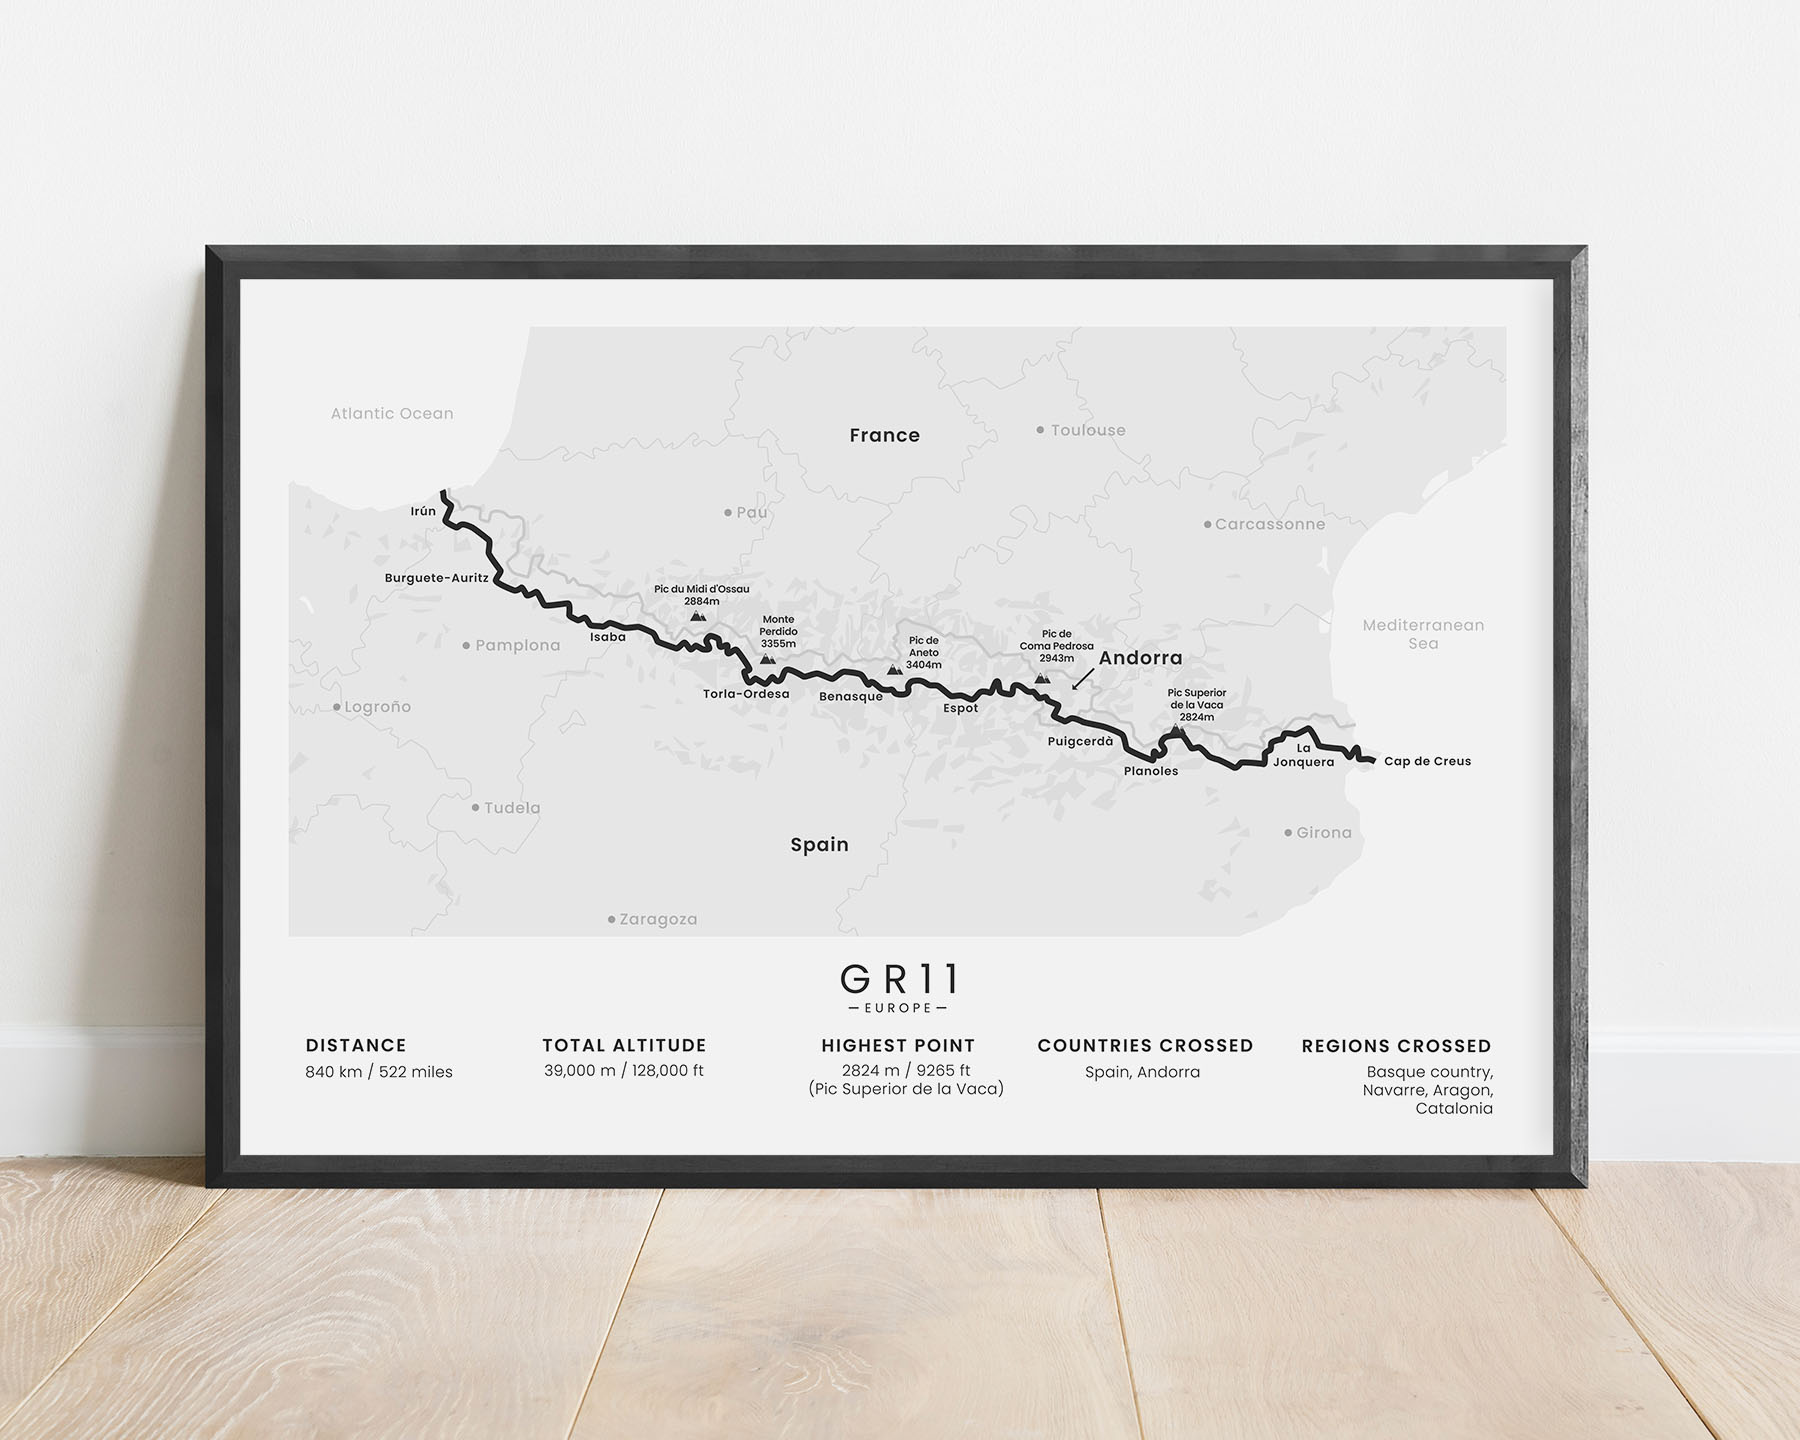 GR11 route poster with white background (Spain)